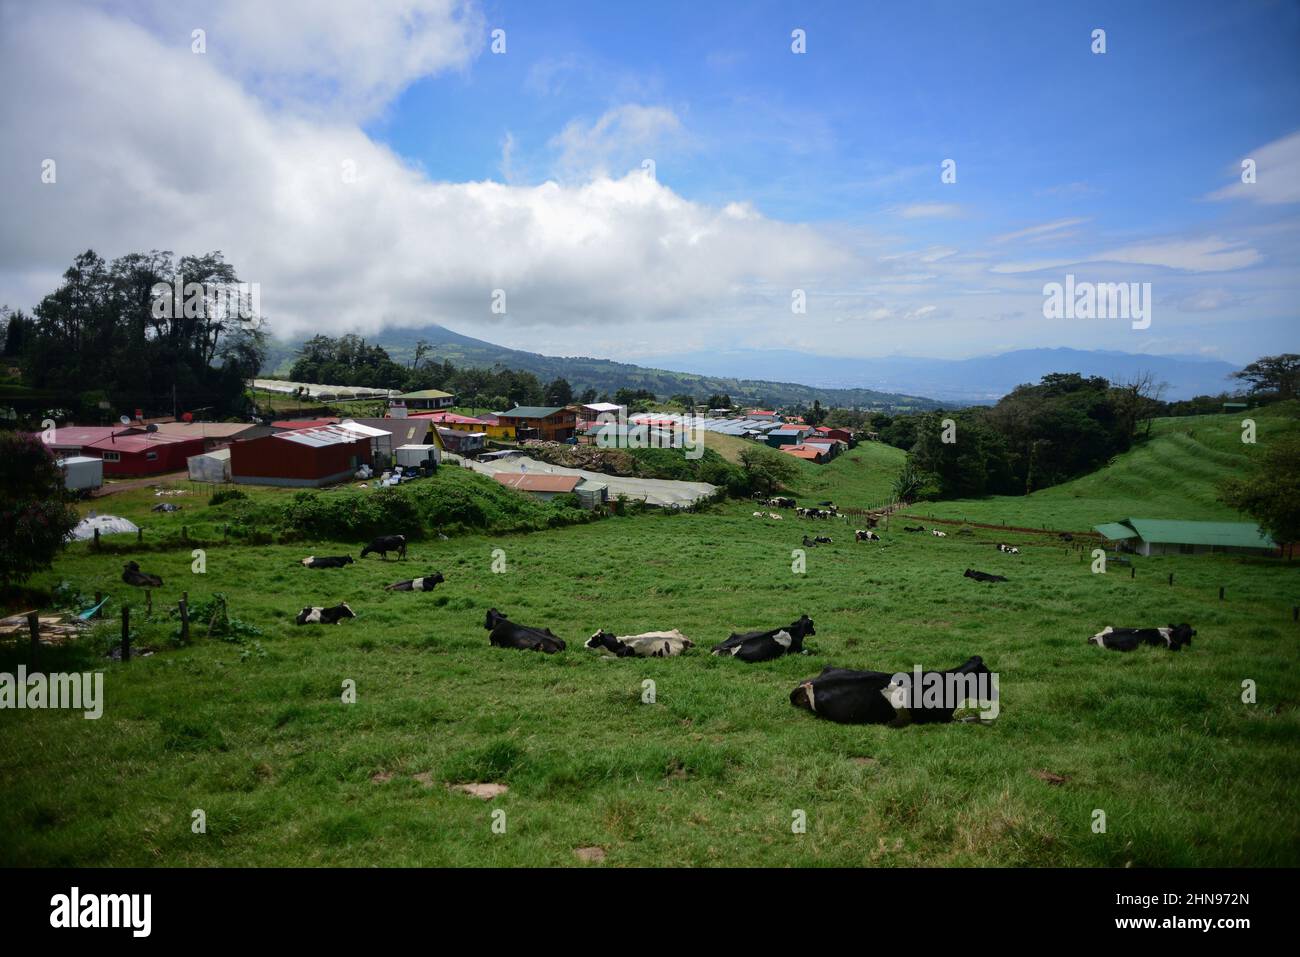 Cows rest in the mountain fields of Costa Rica Stock Photo